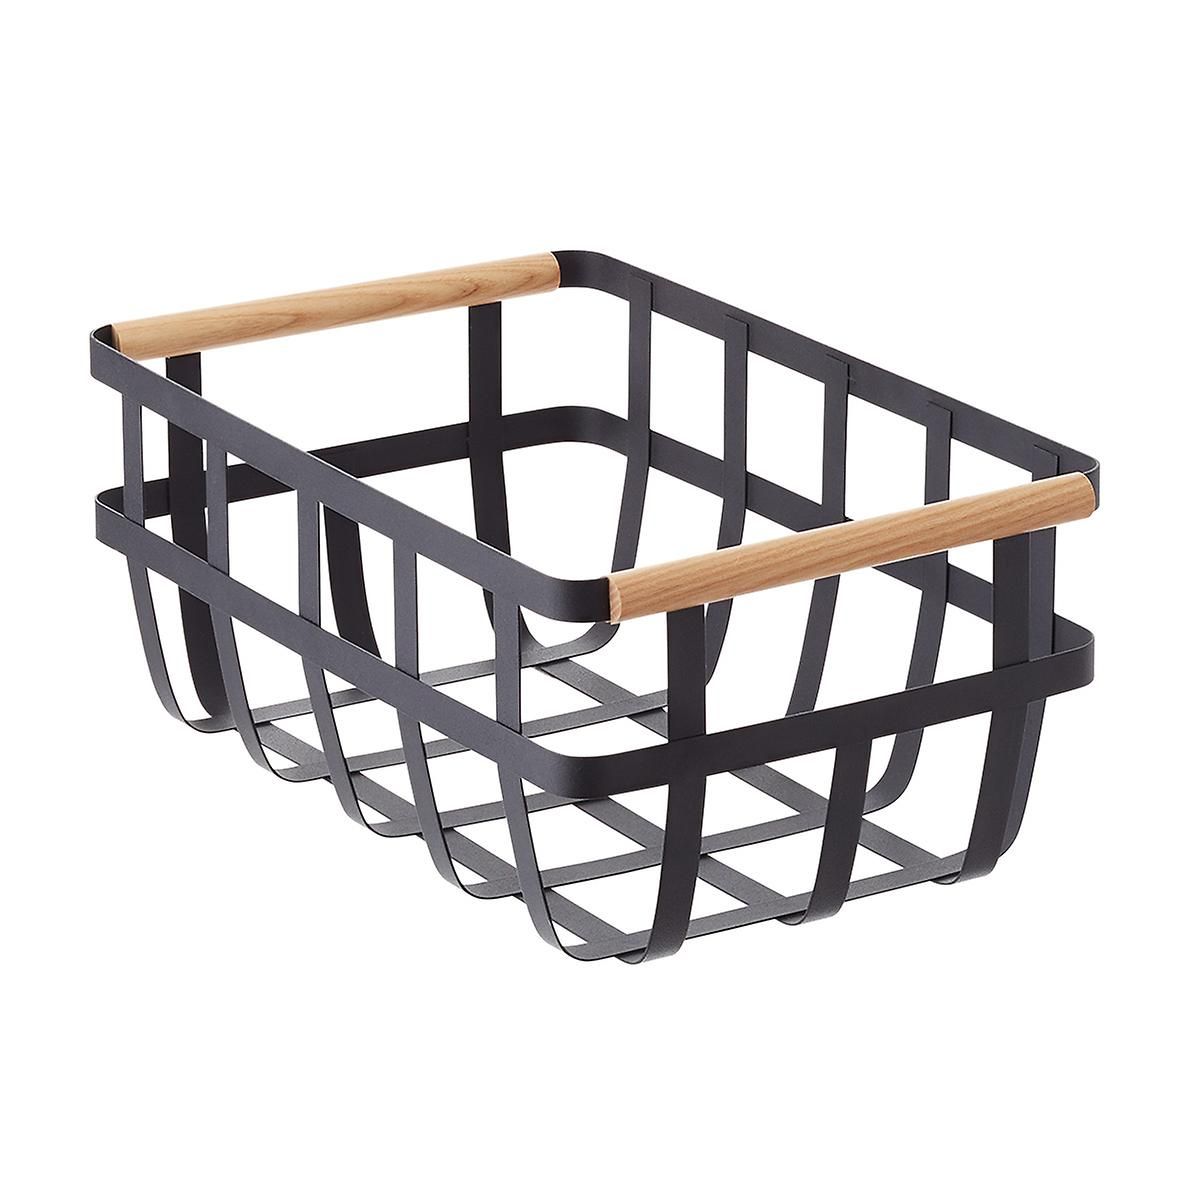 Yamazaki Black Tosca Basket with Wooden Handles | The Container Store